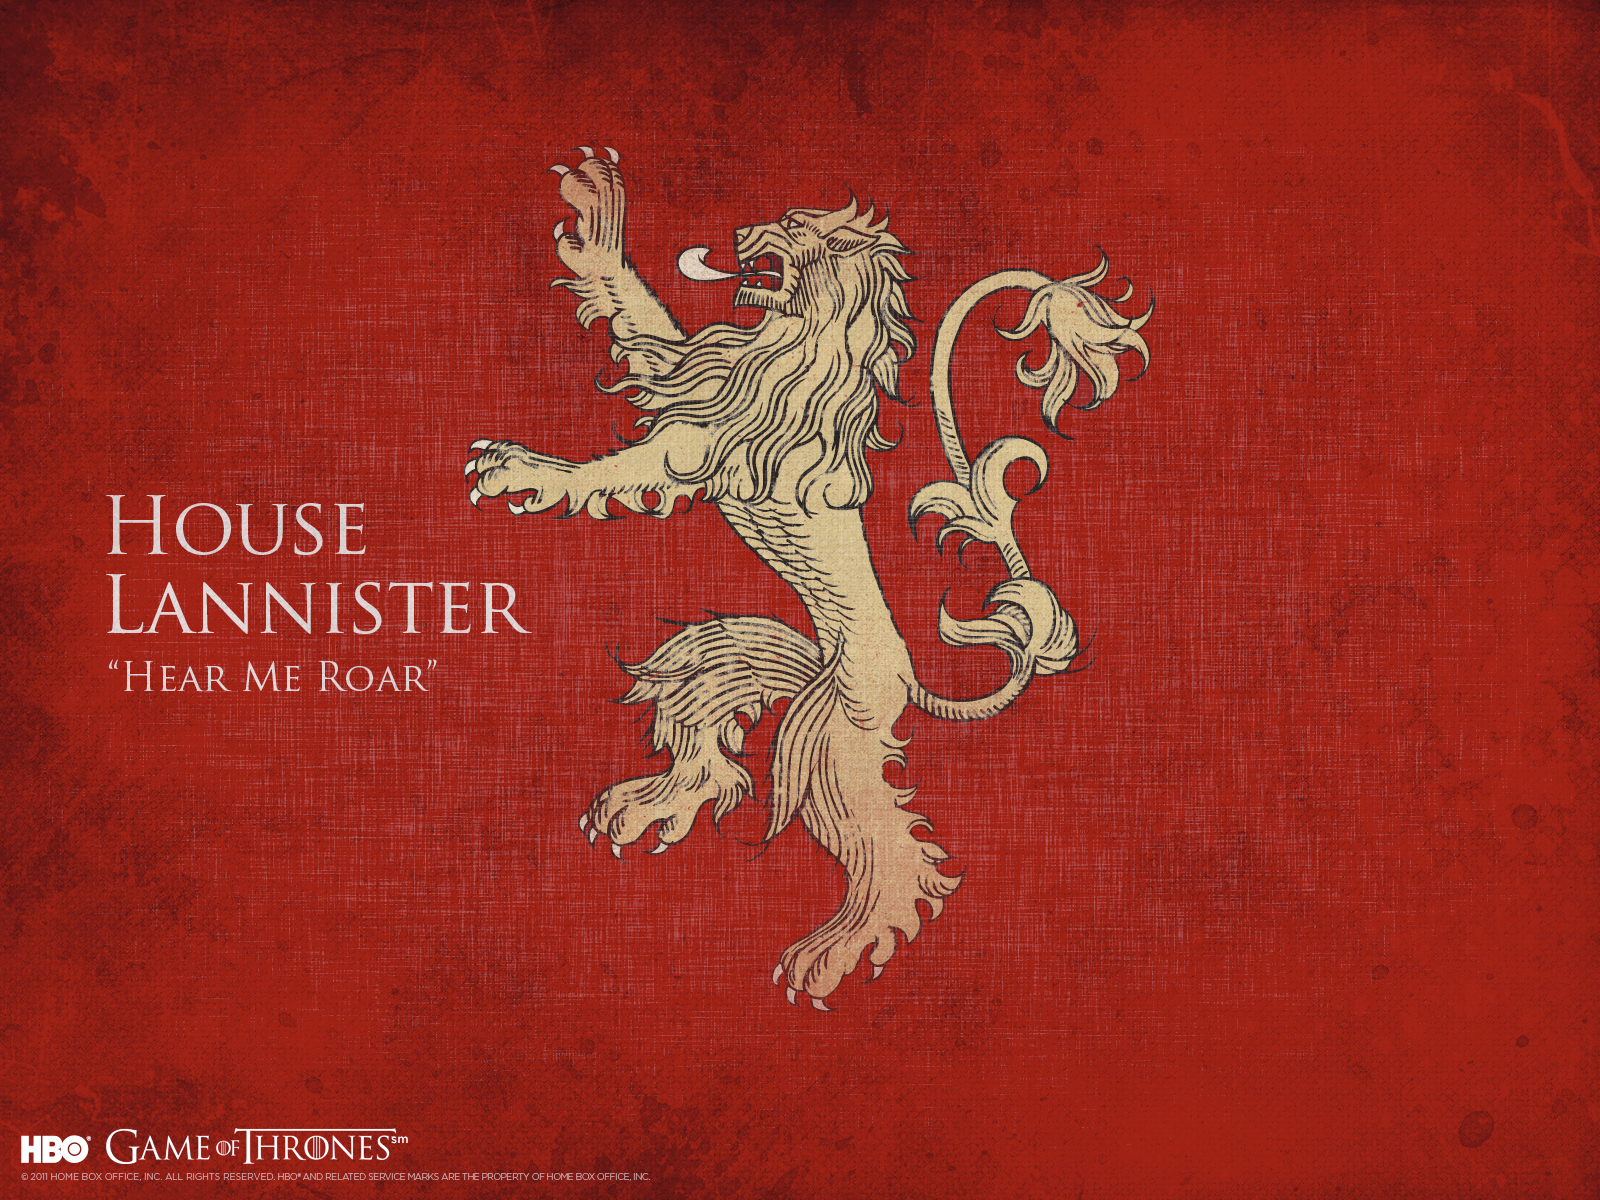 Flails and Nails: Inspired By...Game of Thrones - House Lannister